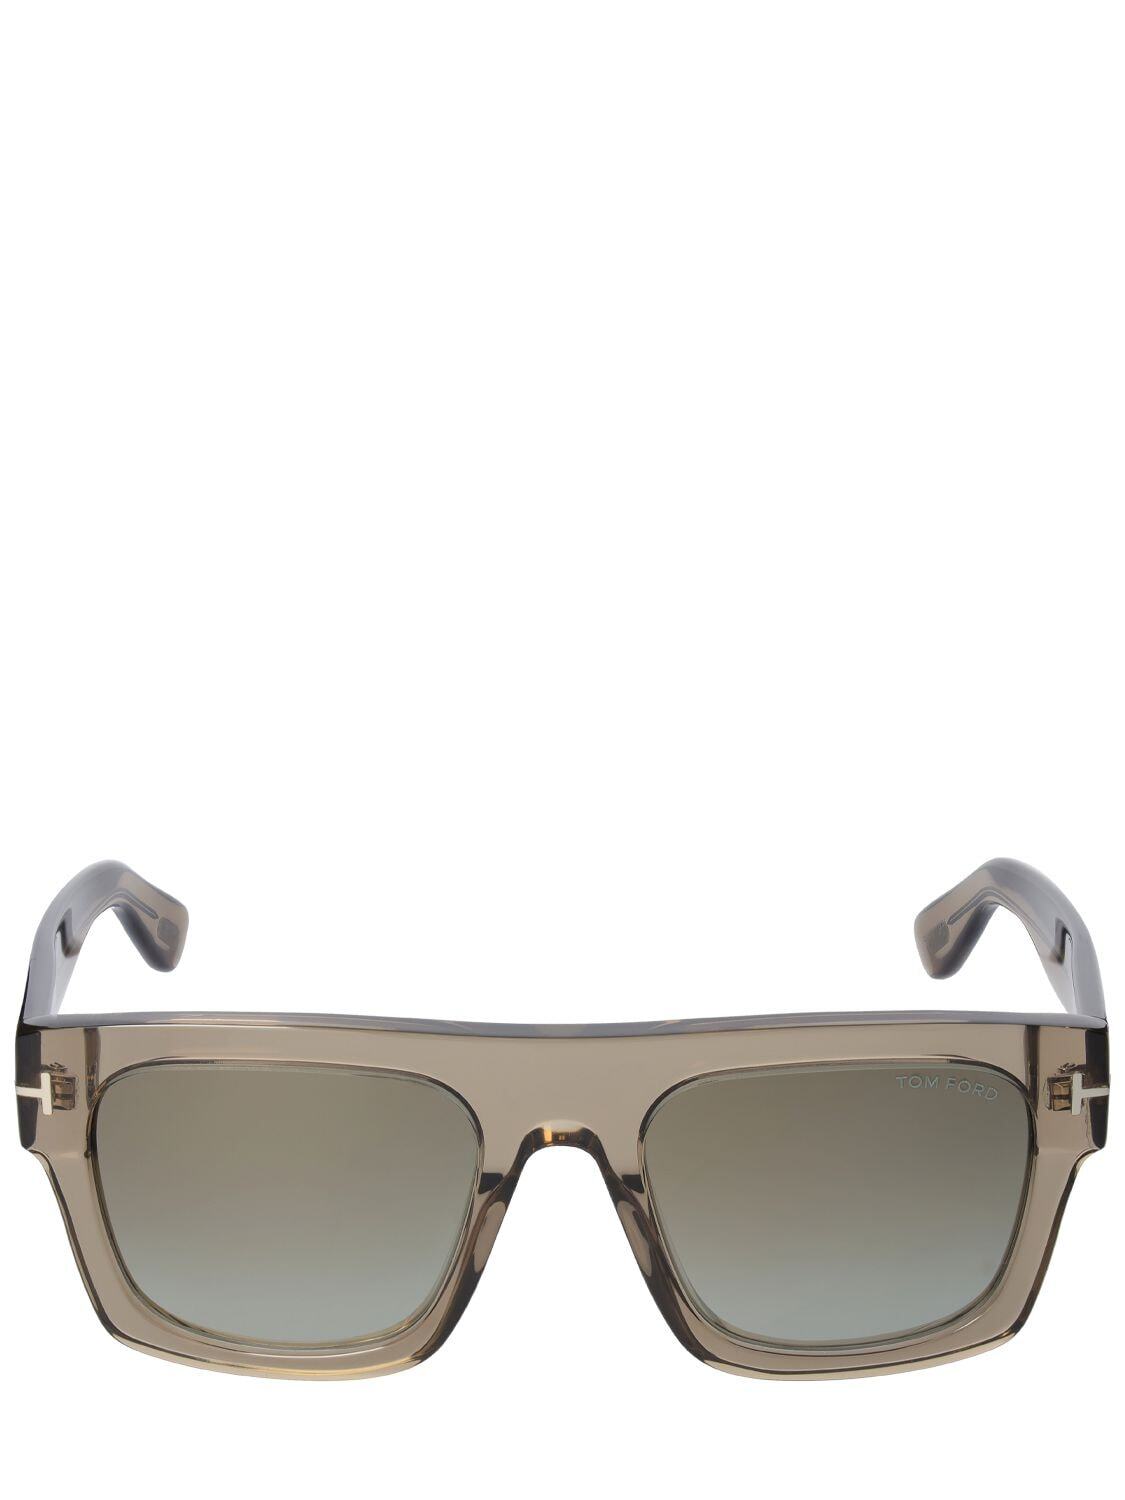 TOM FORD Fausto Squared Acetate Sunglasses in brown